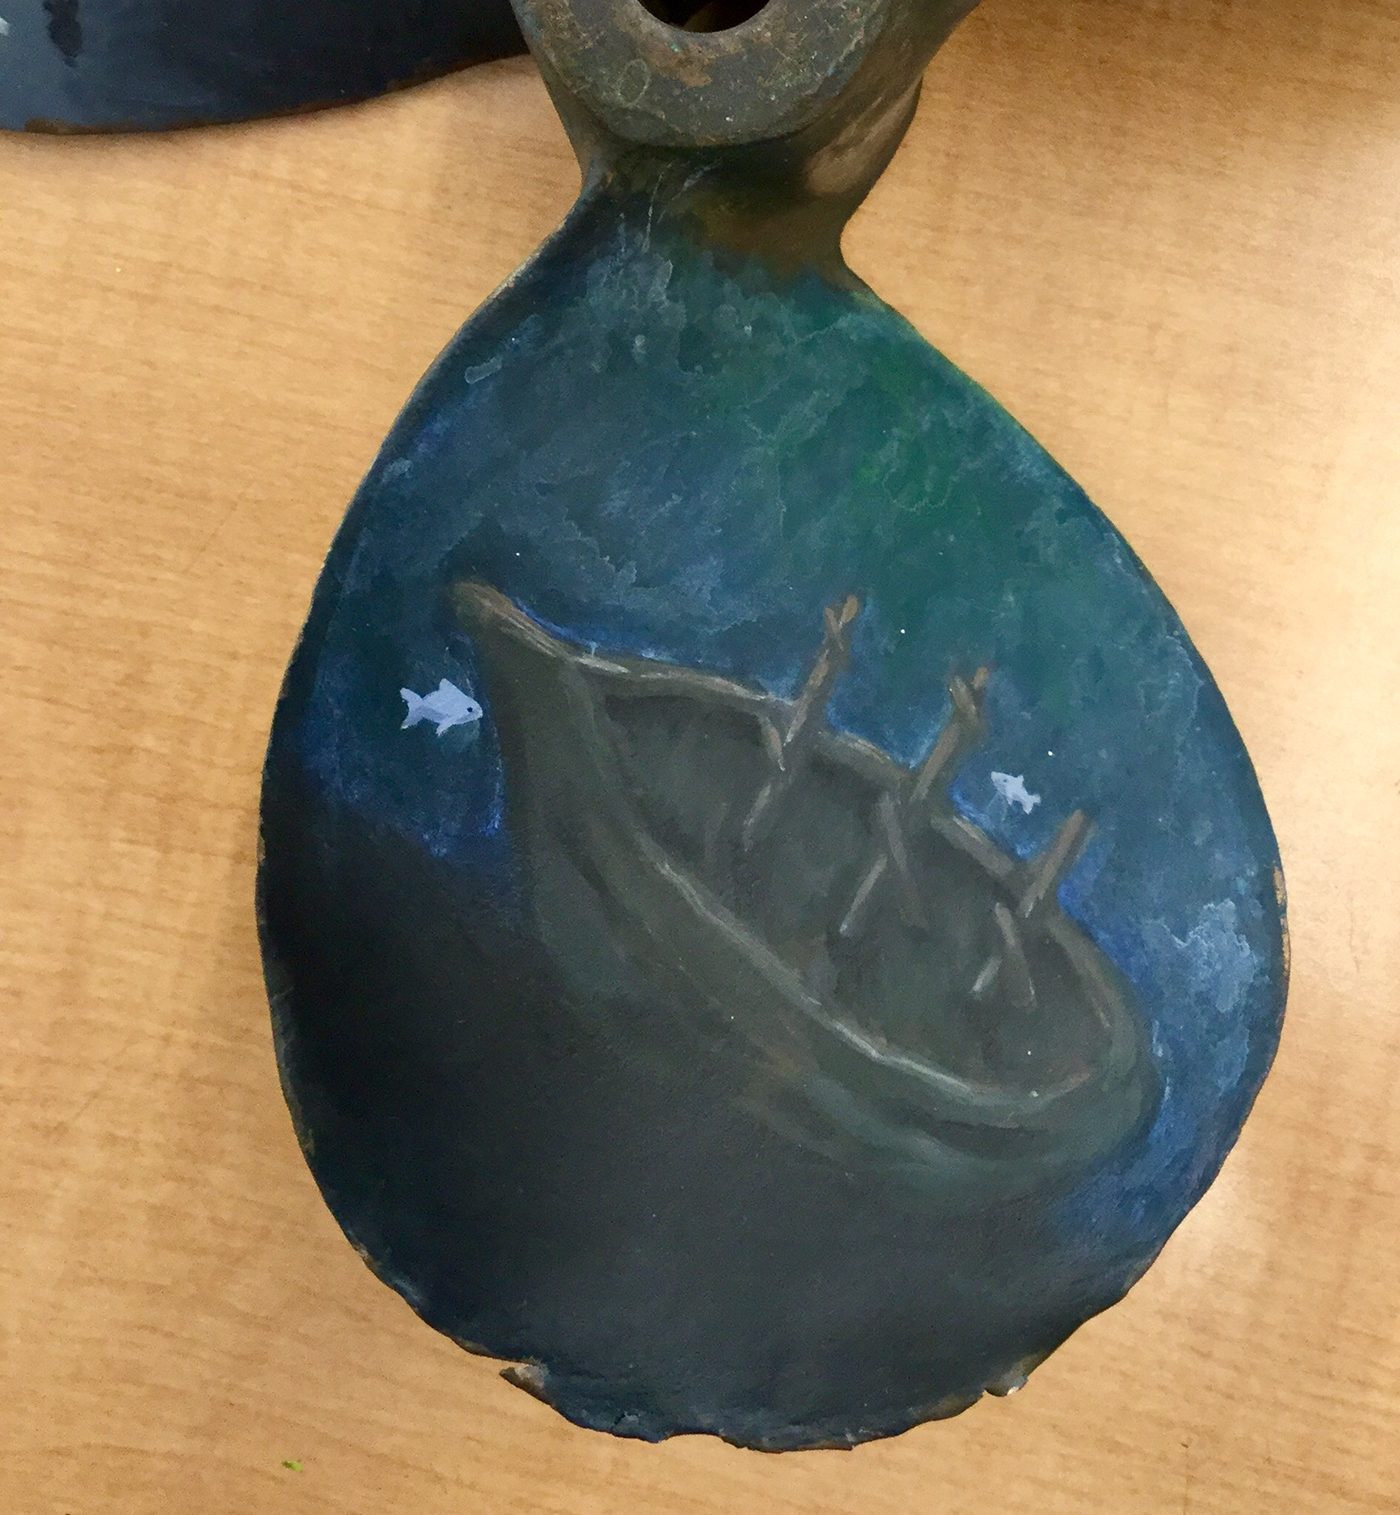 Ocean acrylic class Propellor ap drawing and painting